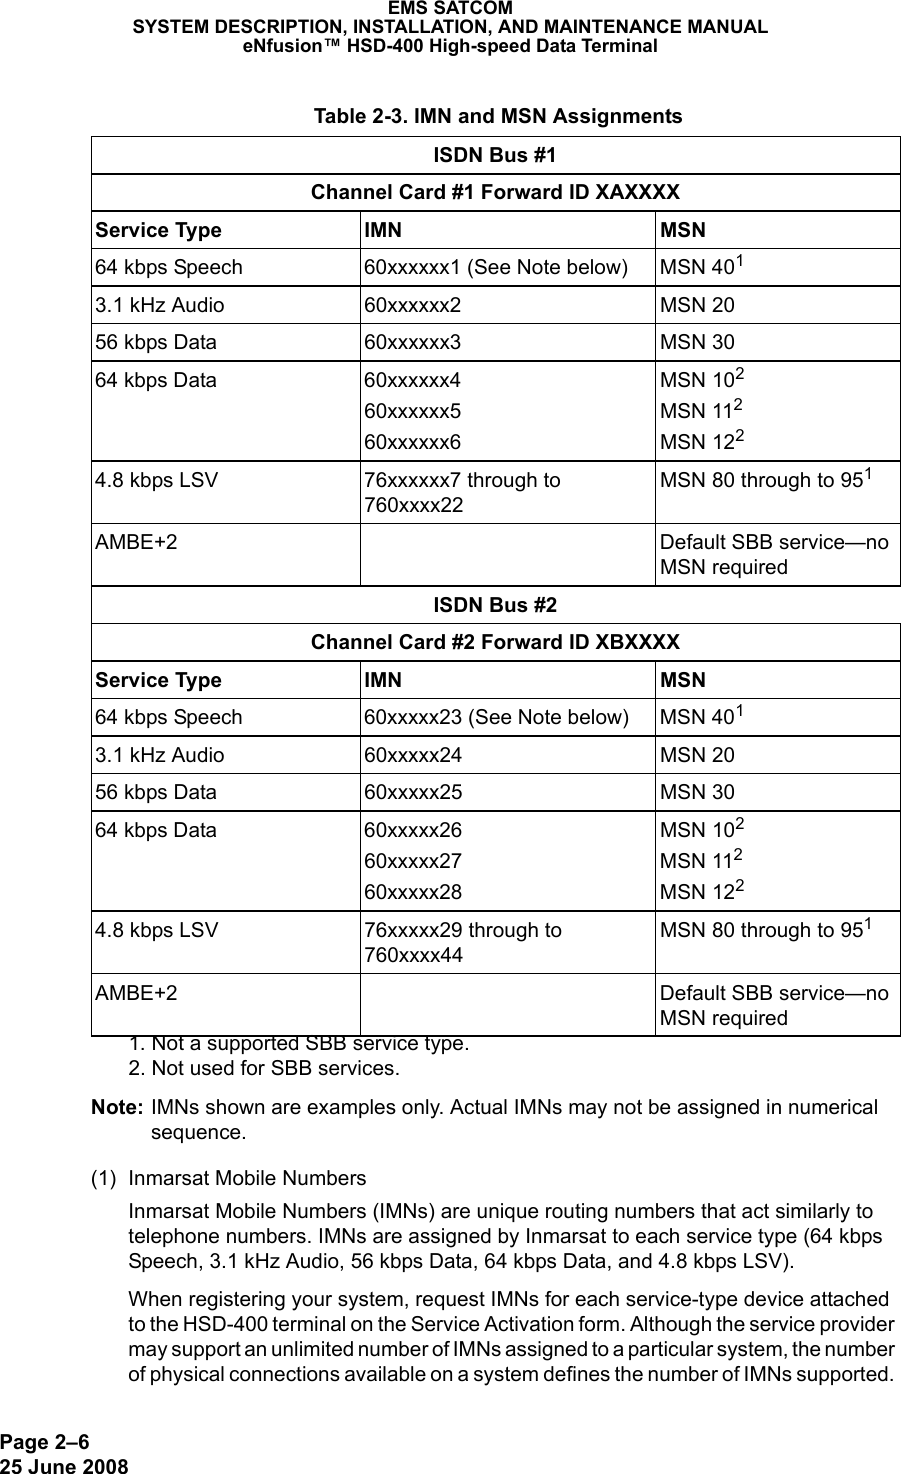 Page 2–625 June 2008 EMS SATCOMSYSTEM DESCRIPTION, INSTALLATION, AND MAINTENANCE MANUALeNfusion™ HSD-400 High-speed Data TerminalNote: IMNs shown are examples only. Actual IMNs may not be assigned in numerical sequence.(1) Inmarsat Mobile NumbersInmarsat Mobile Numbers (IMNs) are unique routing numbers that act similarly to telephone numbers. IMNs are assigned by Inmarsat to each service type (64 kbps Speech, 3.1 kHz Audio, 56 kbps Data, 64 kbps Data, and 4.8 kbps LSV).When registering your system, request IMNs for each service-type device attached to the HSD-400 terminal on the Service Activation form. Although the service provider may support an unlimited number of IMNs assigned to a particular system, the number of physical connections available on a system defines the number of IMNs supported.  Table 2-3. IMN and MSN Assignments ISDN Bus #1Channel Card #1 Forward ID XAXXXXService Type IMN MSN64 kbps Speech 60xxxxxx1 (See Note below) MSN 4011. Not a supported SBB service type.3.1 kHz Audio 60xxxxxx2 MSN 2056 kbps Data 60xxxxxx3 MSN 3064 kbps Data 60xxxxxx460xxxxxx560xxxxxx6MSN 102MSN 112MSN 1222. Not used for SBB services.4.8 kbps LSV  76xxxxxx7 through to 760xxxx22MSN 80 through to 951AMBE+2 Default SBB service—no MSN requiredISDN Bus #2Channel Card #2 Forward ID XBXXXXService Type IMN MSN64 kbps Speech 60xxxxx23 (See Note below) MSN 4013.1 kHz Audio 60xxxxx24 MSN 2056 kbps Data 60xxxxx25 MSN 3064 kbps Data 60xxxxx2660xxxxx2760xxxxx28MSN 102MSN 112MSN 1224.8 kbps LSV  76xxxxx29 through to 760xxxx44MSN 80 through to 951AMBE+2 Default SBB service—no MSN required